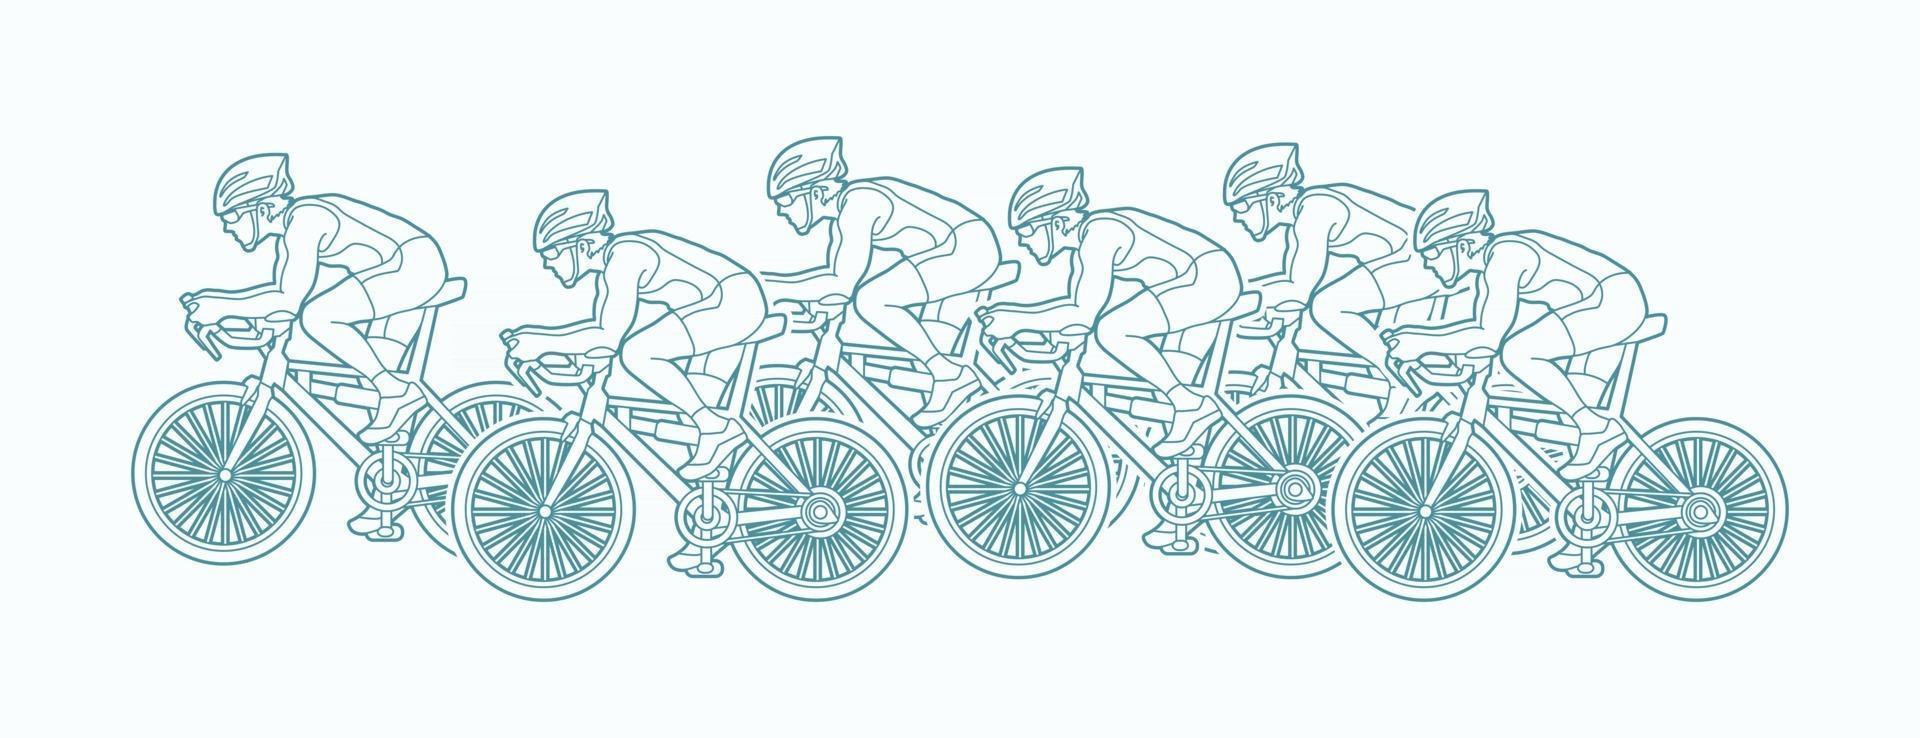 Outline Group of Bicycle Racing vector